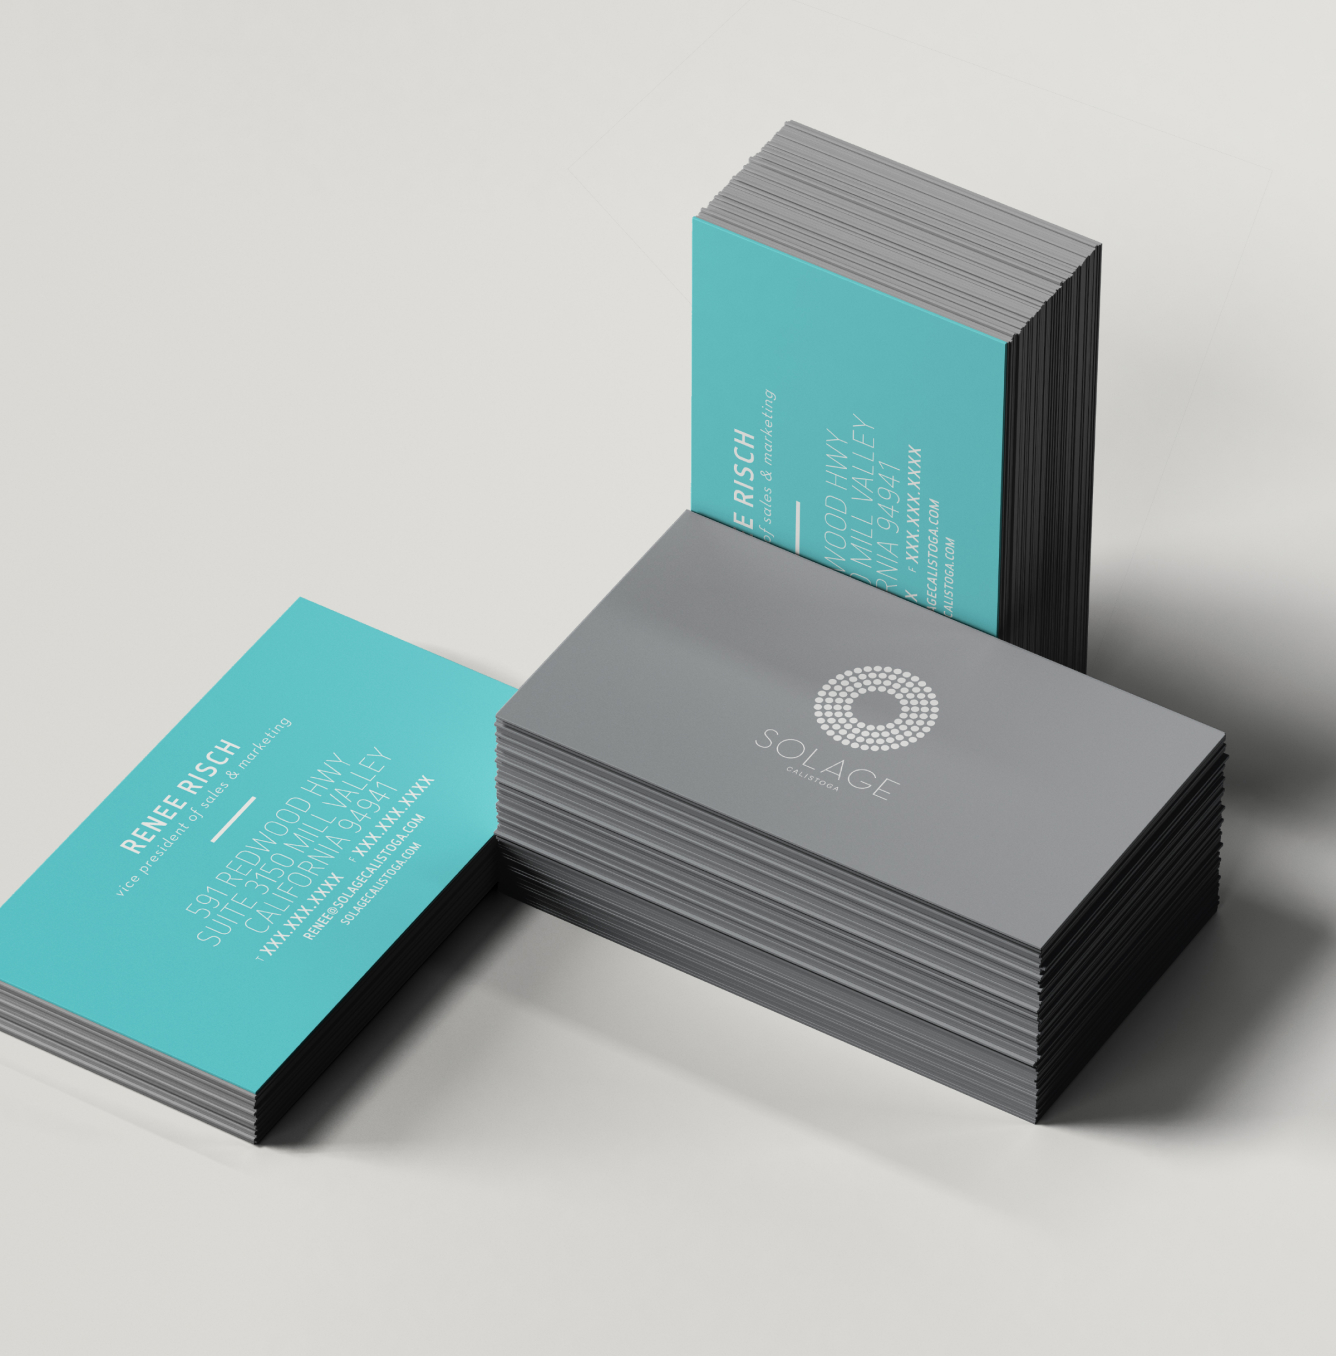 Solage branded business card